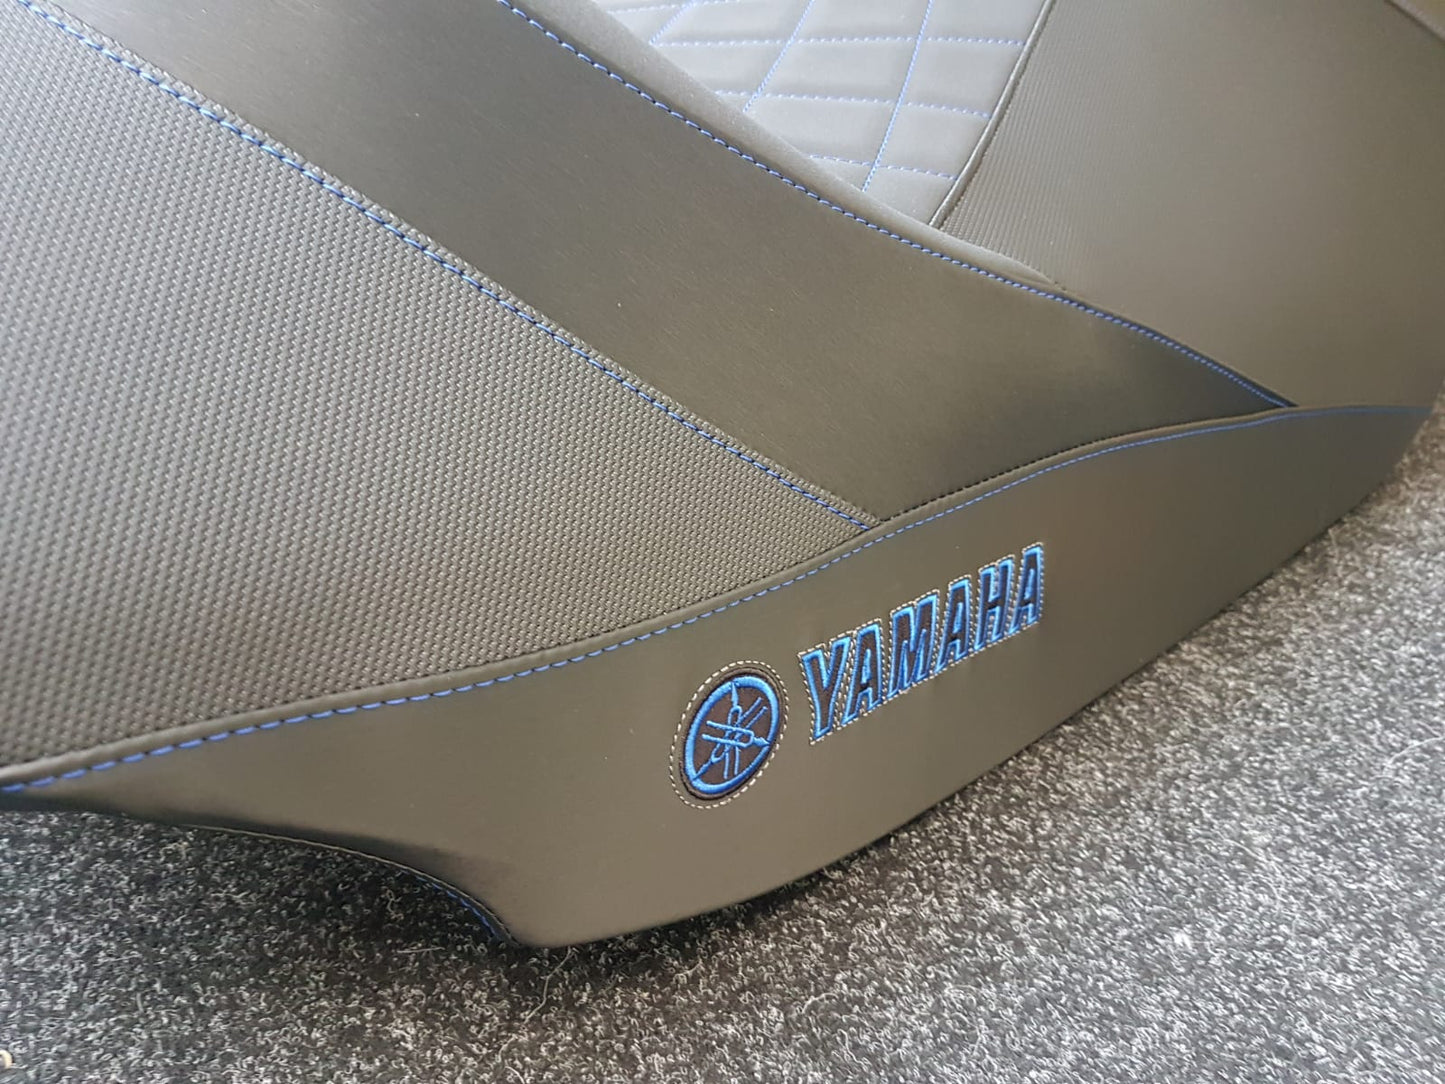 Grip Gear Seadoo Yamaha Replacement Seat Cover